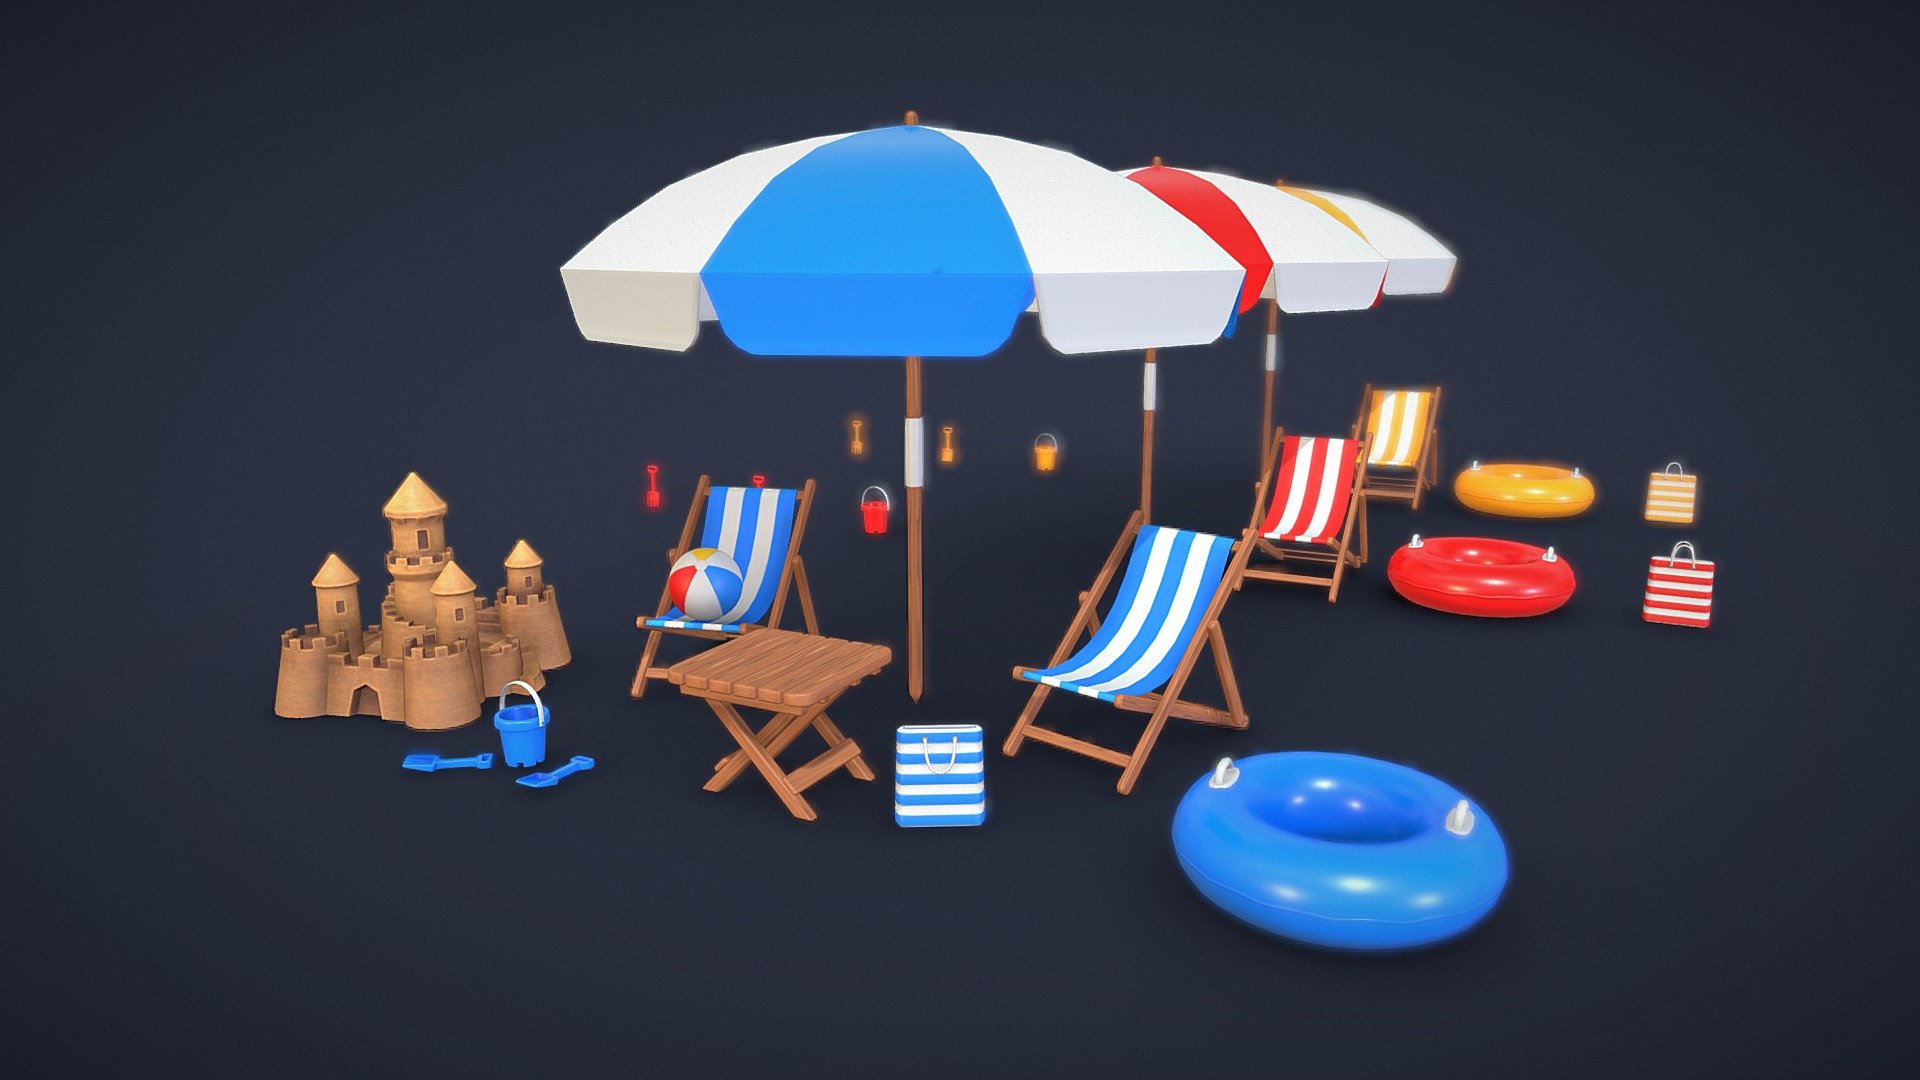 Pack of 24 different models for beach

Pack include:




Beach Bag - 1 548 tris

Beach Ball - 768 tris

Beach Chair - 1 066 tris

Beach Table - 848 tris

Beach Umbrella - 824 tris

Bucket - 1 784 tris

Rake - 516 tris

Sand Castle - 3 055 tris

Shovel - 420 tris

Swim Ring - 1 408 tris

Diffuse, Normal, Roughness and Metalic textures

2048 x 2048 PNG textures

AR / VR / Mobile ready - Beach Pack - Buy Royalty Free 3D model by Andrii Sedykh (@andriisedykh) 3d model